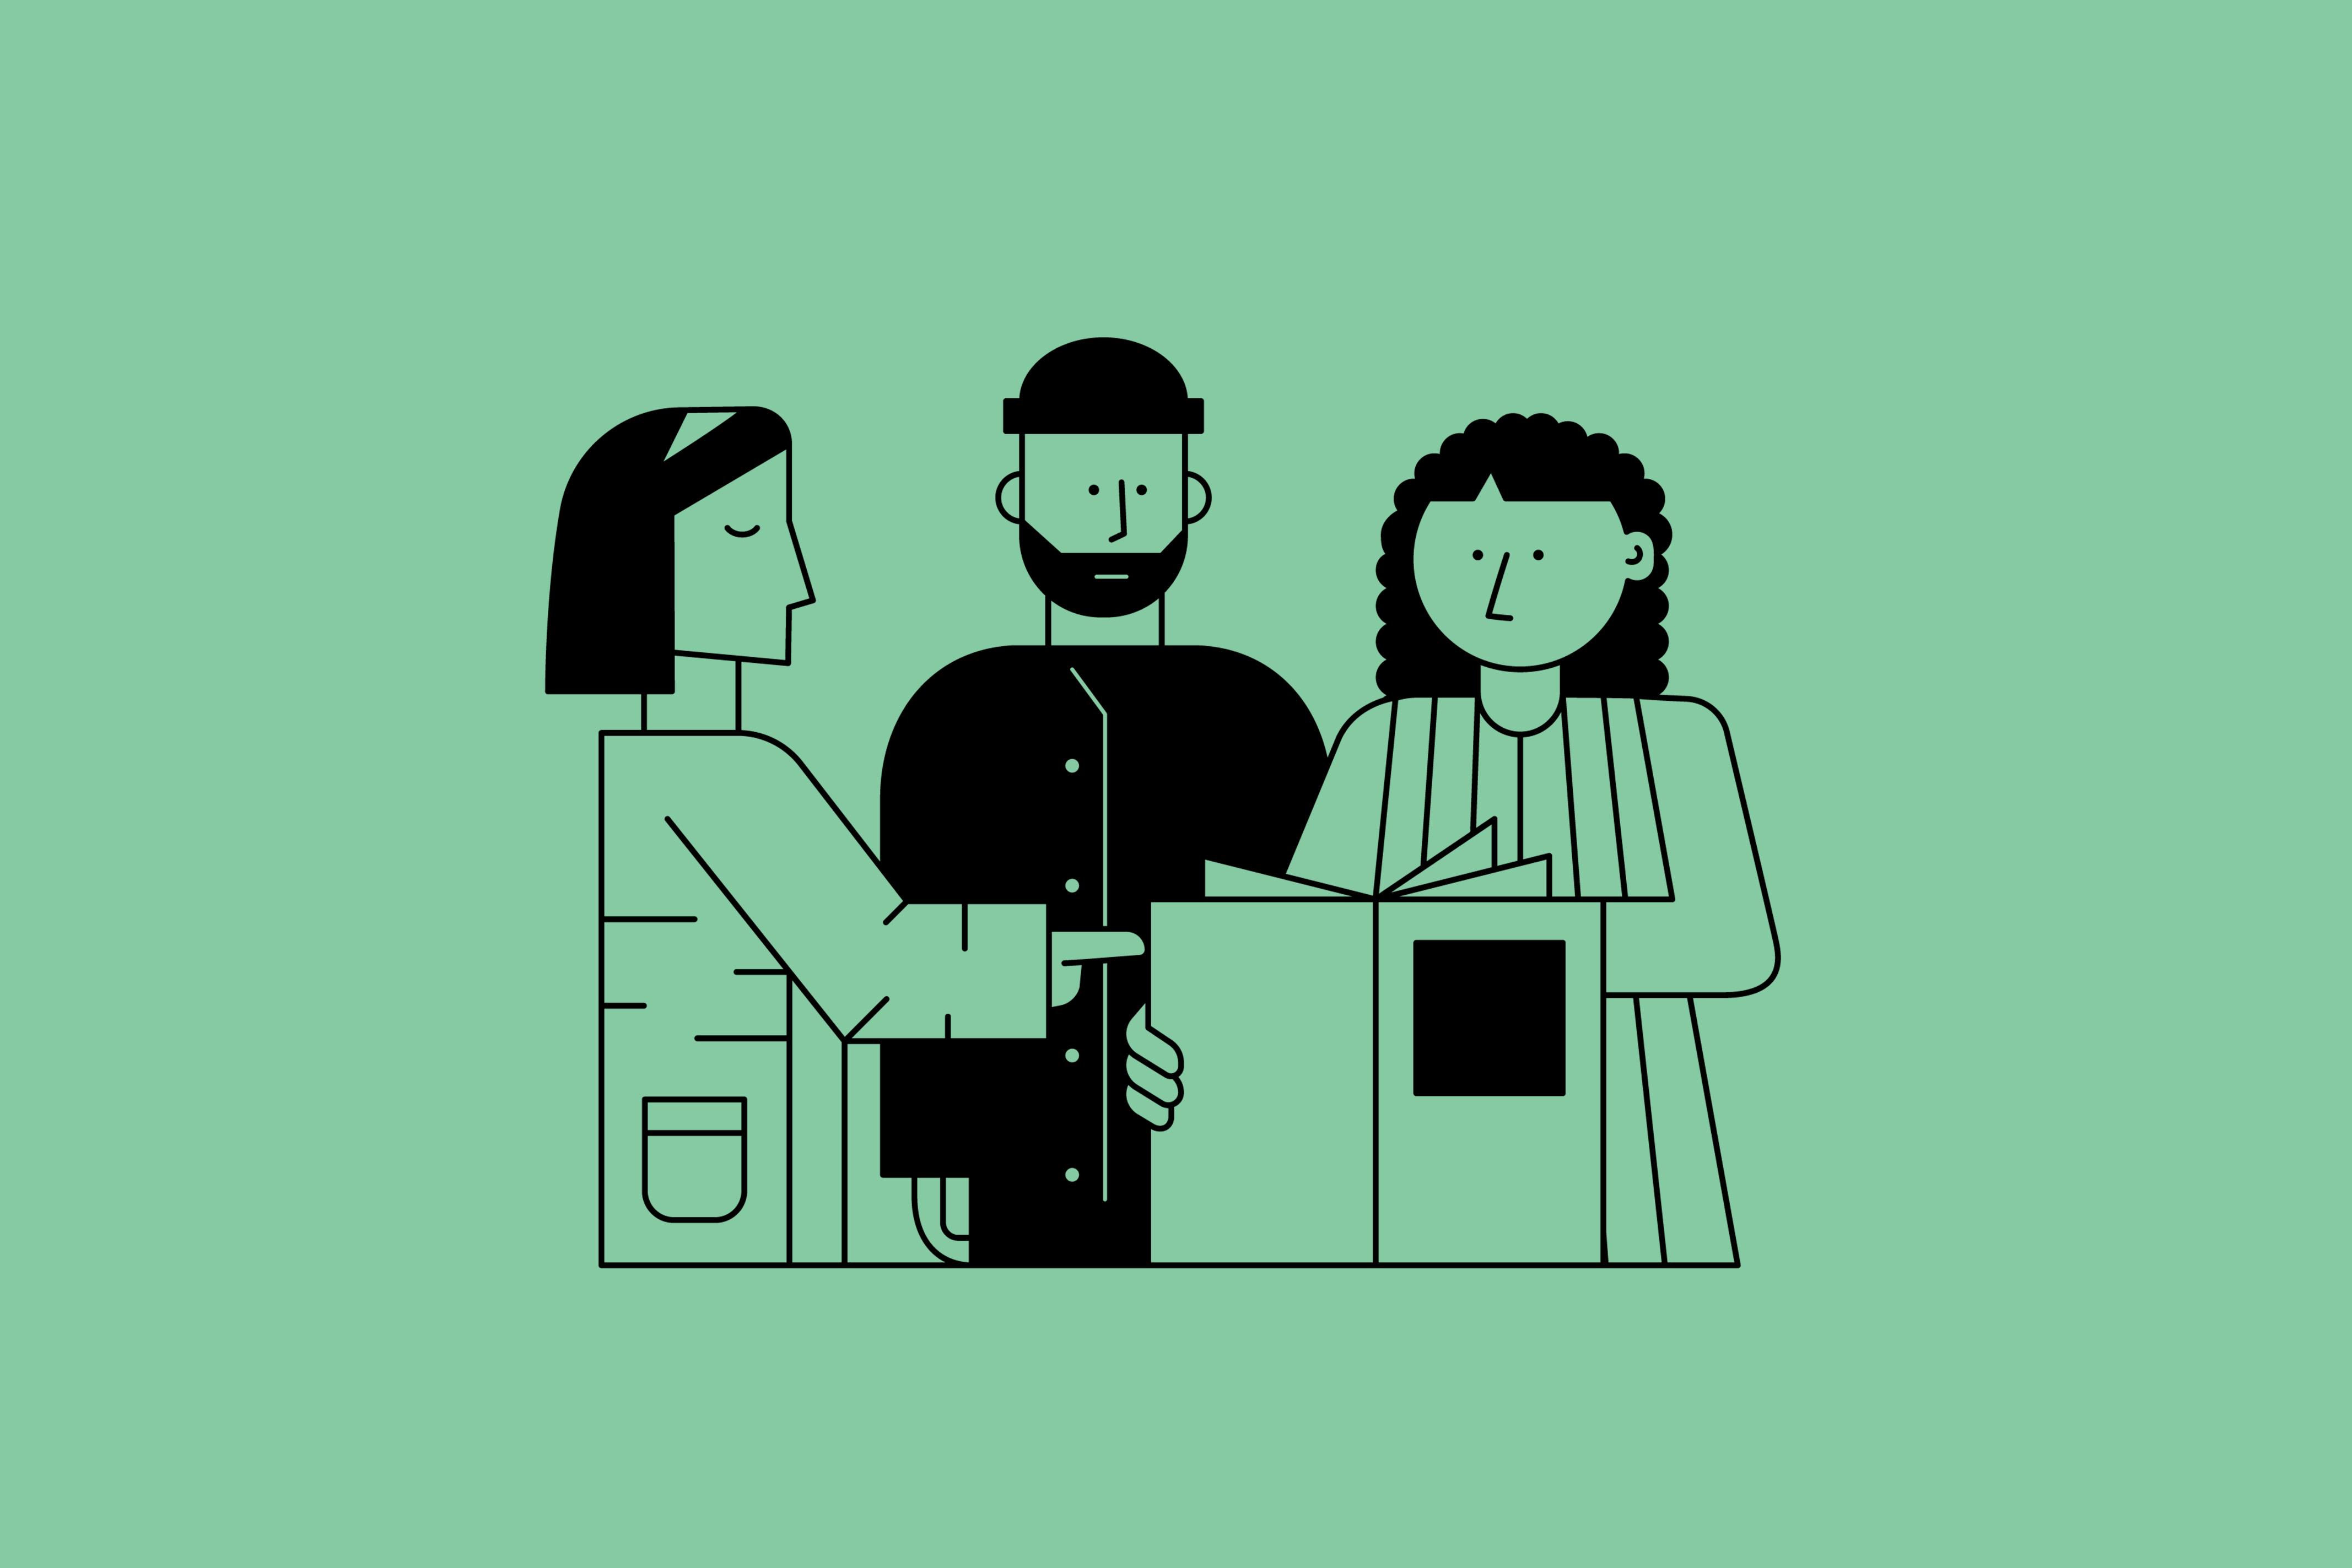 Against a mint green background is an illustration with black lines. Pictured is a small group of three people looking into a book. The right person points to the book with their right index finger.